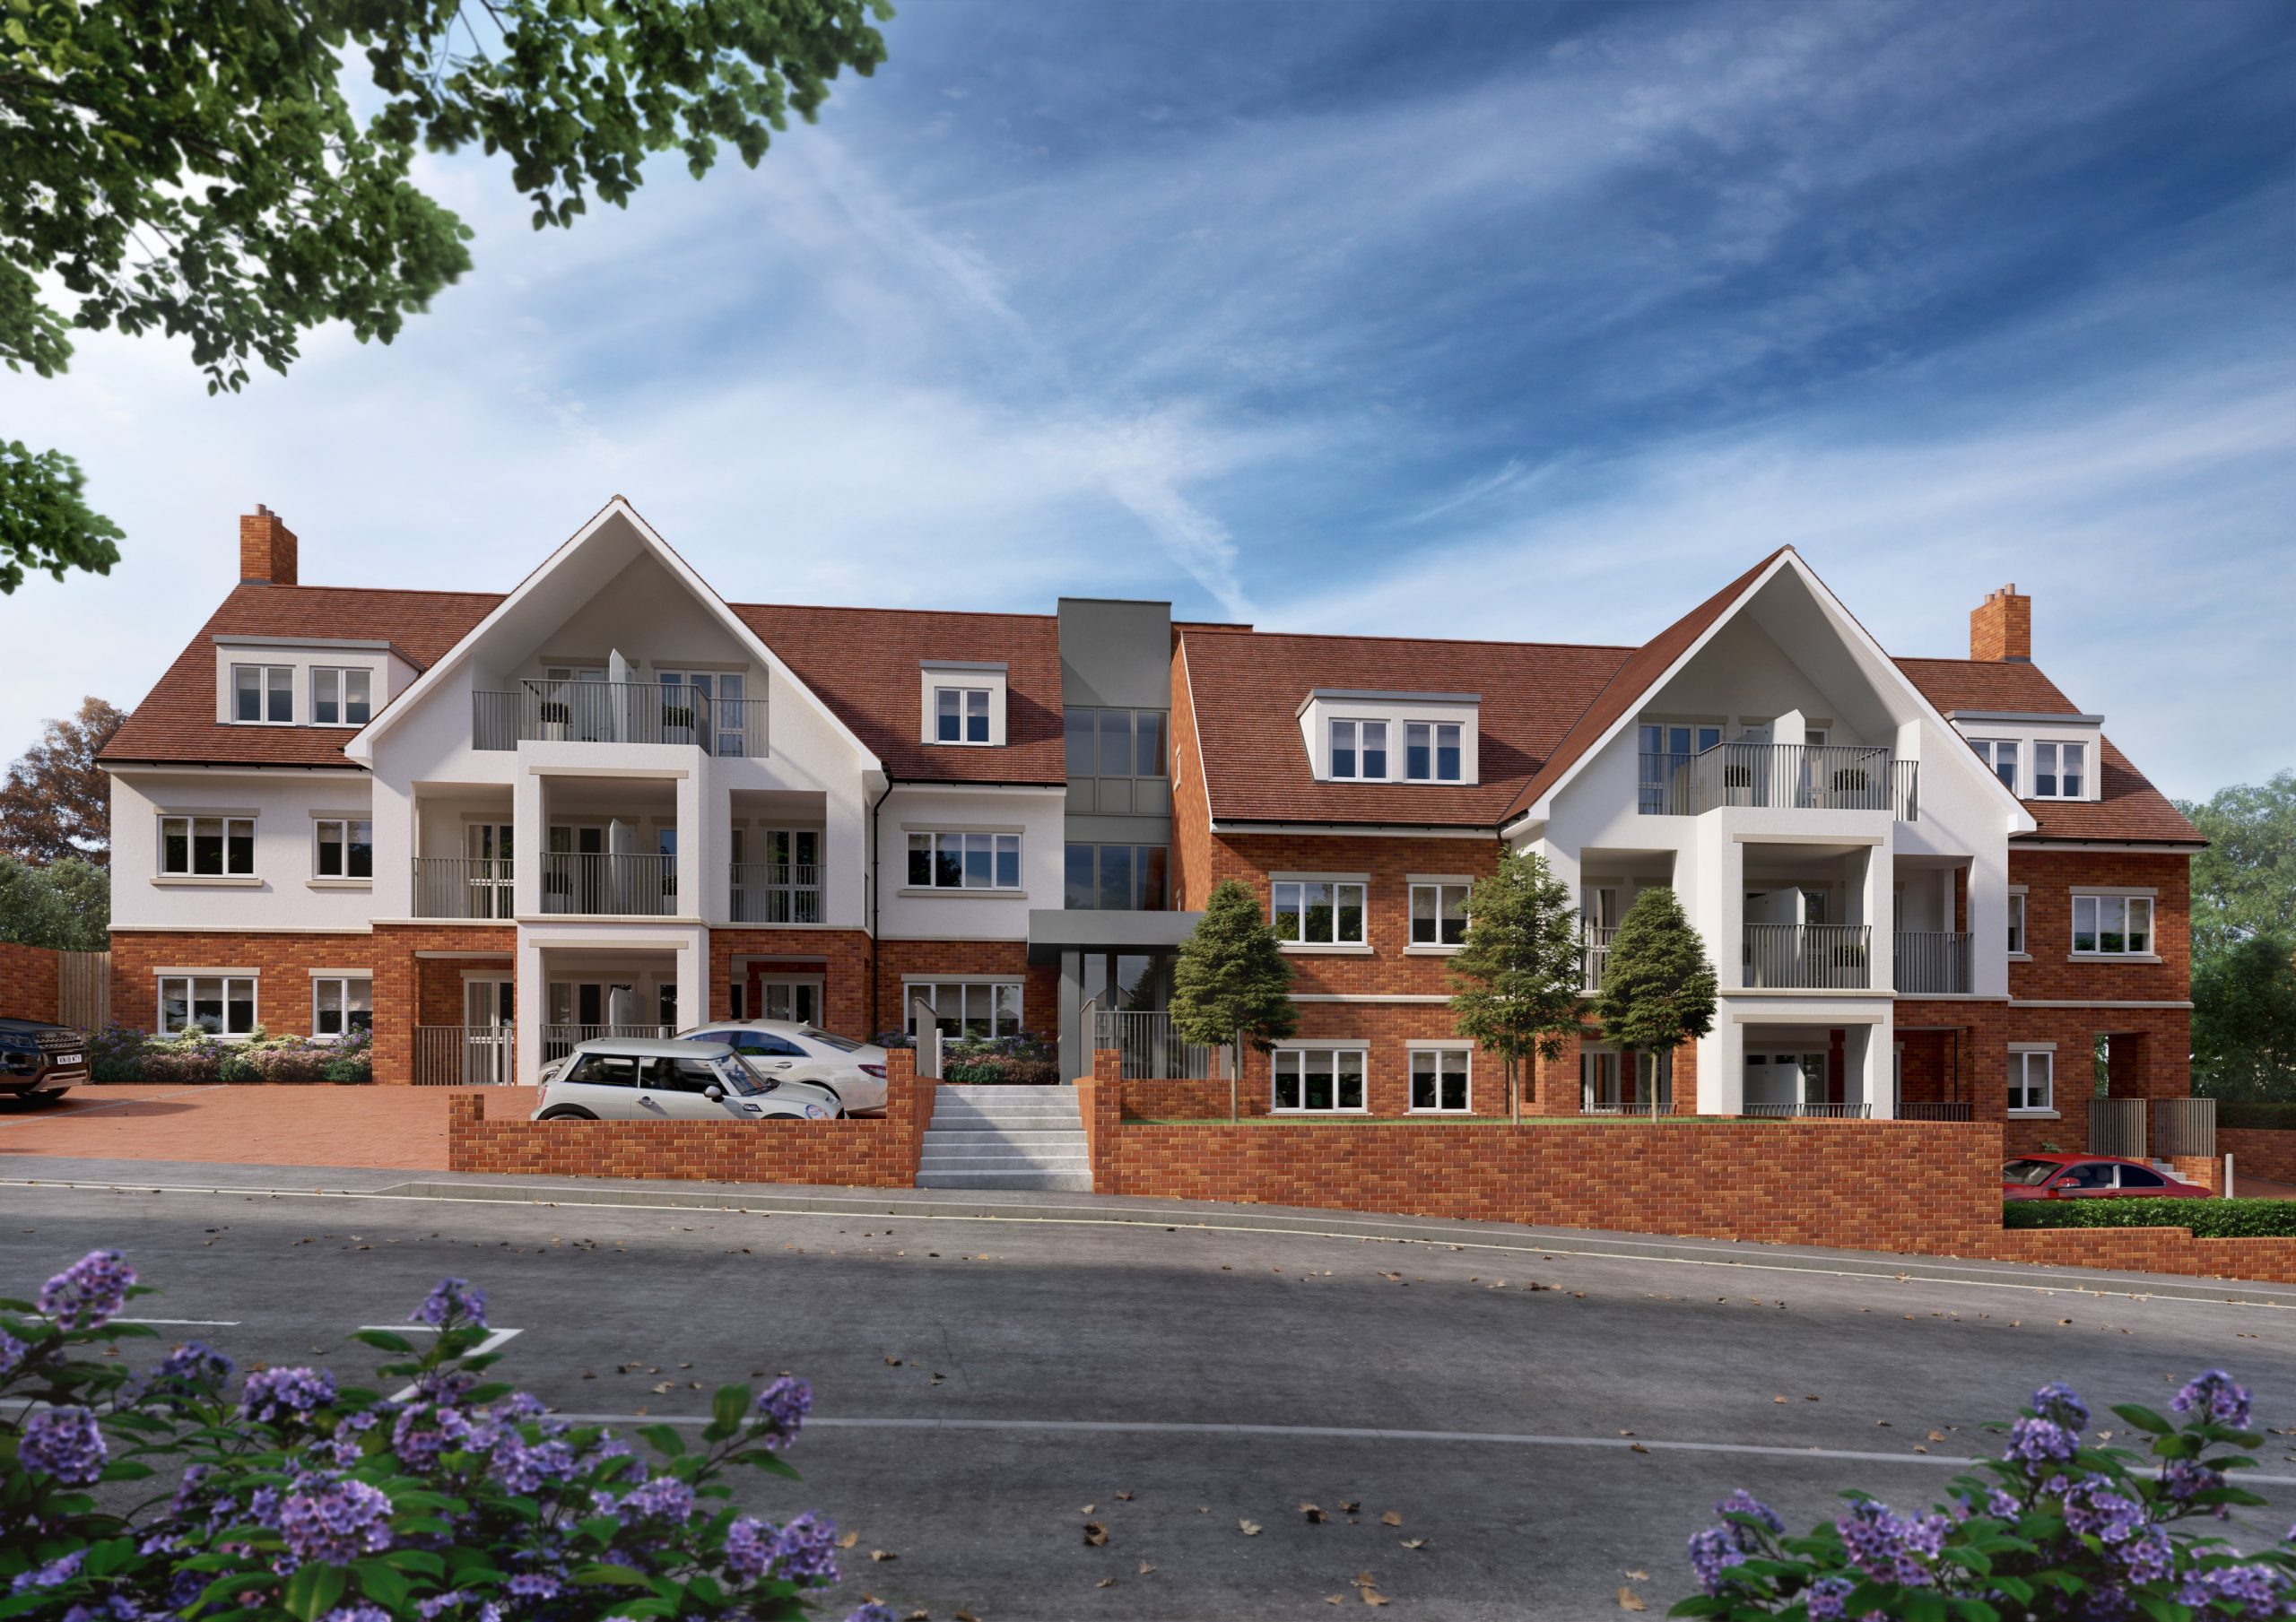 NEW AFFORDABLE HOUSING COMING TO DESIRABLE LONDON SUBURB OF PURLEY